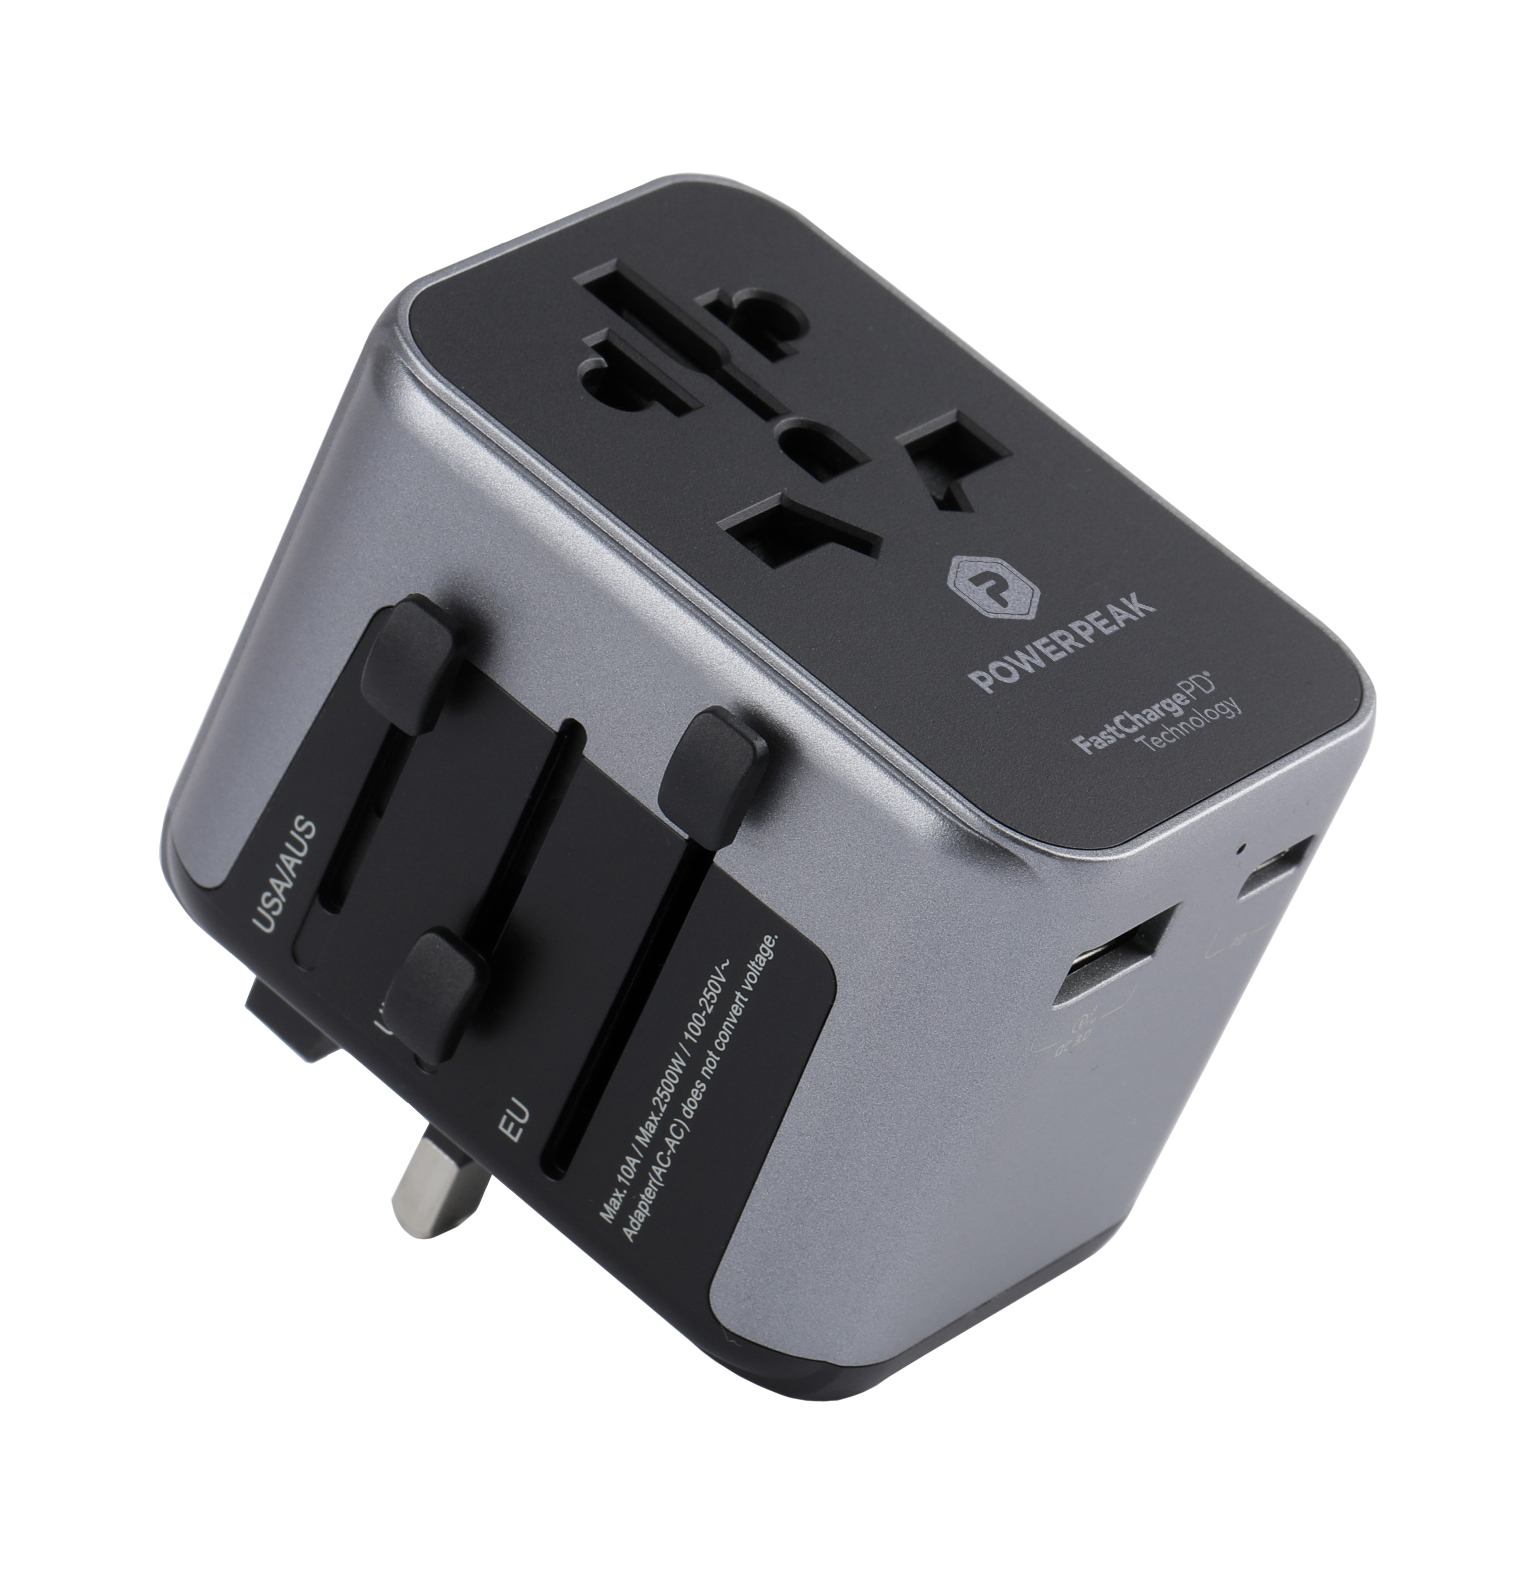 Gray port wall charger. International power adapter. 1 USB-C PD port and 1 standard USB port enable simultaneous high-speed charging of multiple devices